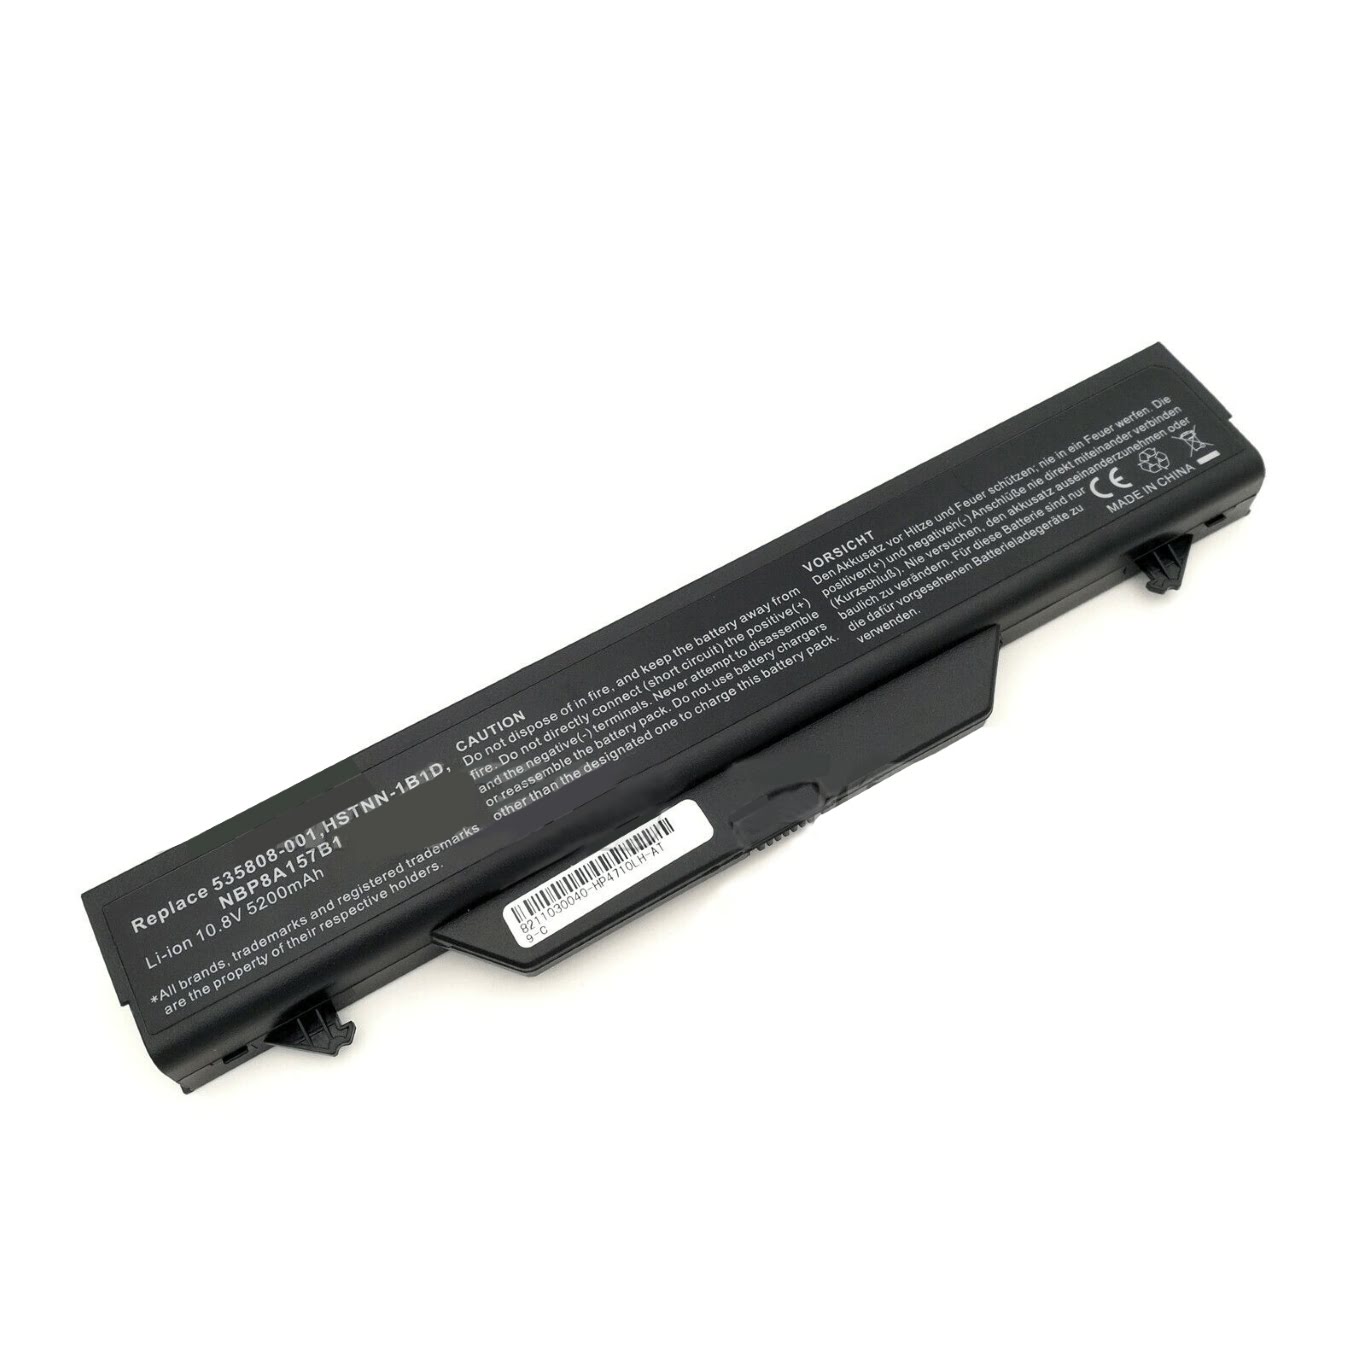 513129-121, 513129-141 replacement Laptop Battery for HP ProBook 4510s, ProBook 4510s/CT, 6 cells, 10.8V, 4400mAh